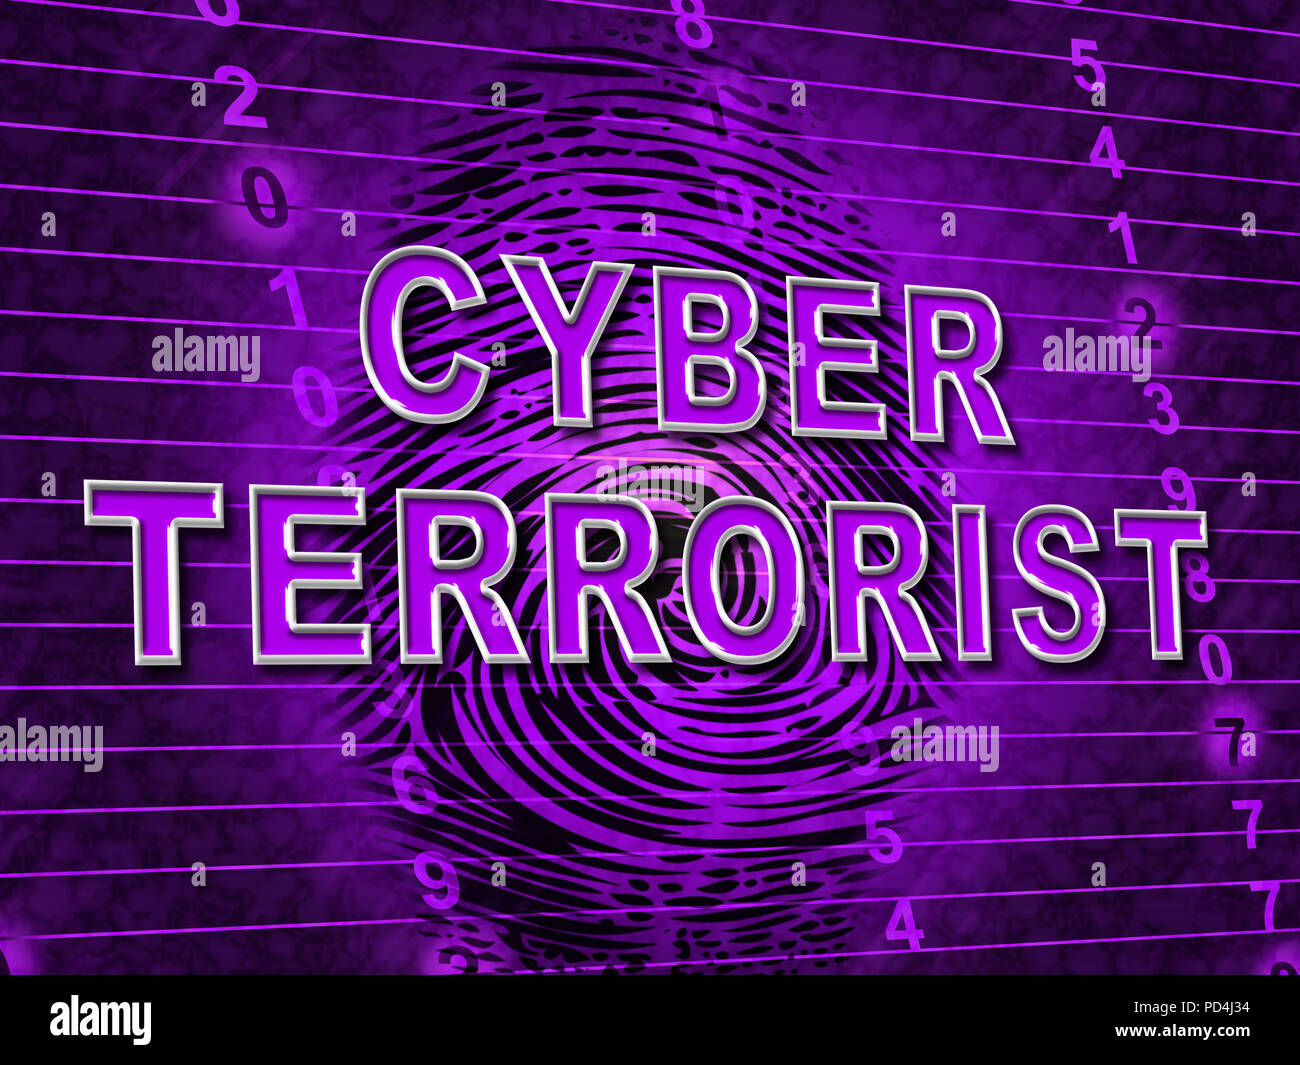 Cyber Terrorist Extremism Hacking Alert 3d Illustration Shows Breach Of Computers Using Digital Espionage And Malware Stock Photo